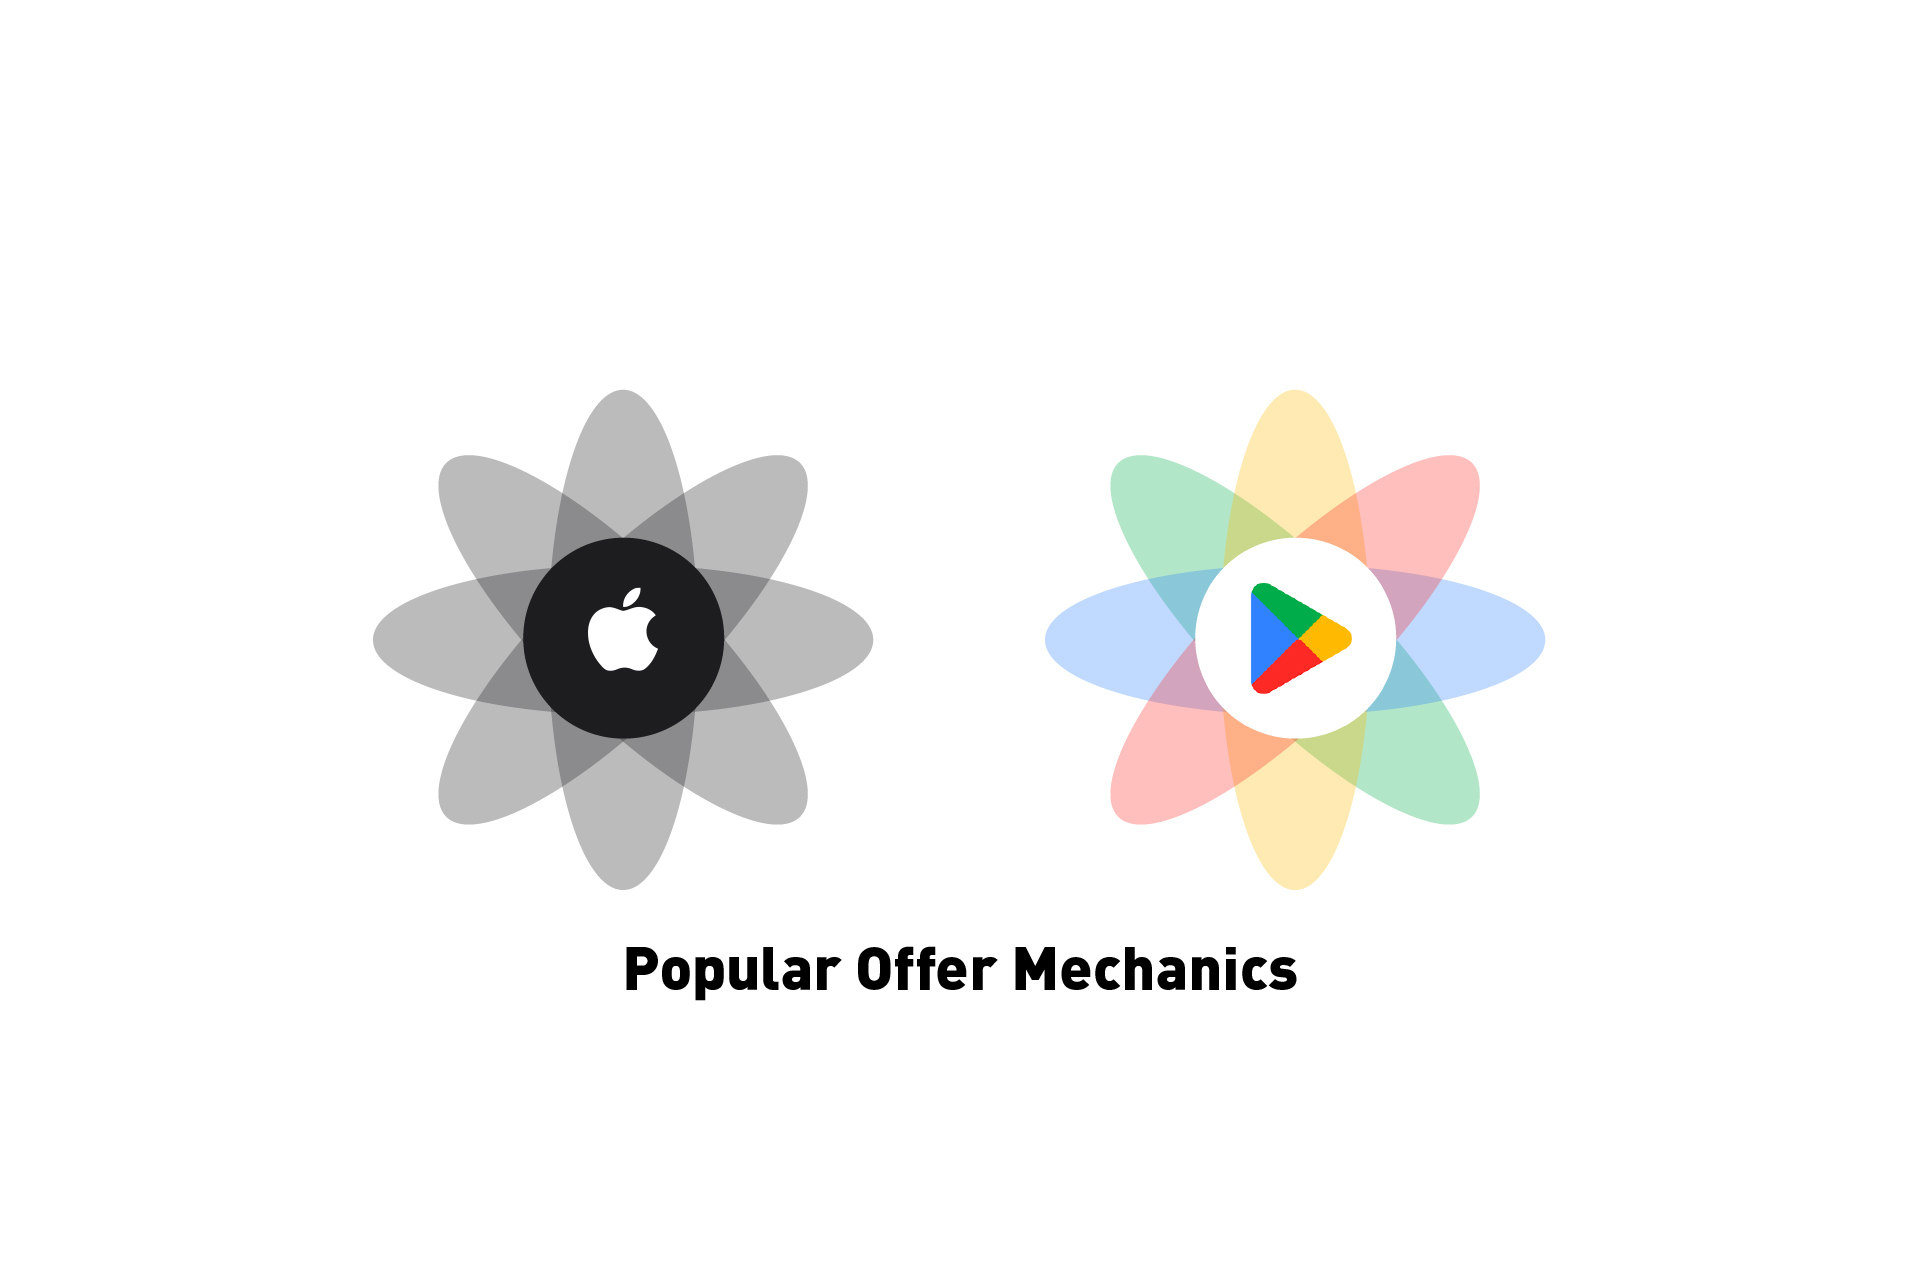 Two flowers that represent Apple and the Google Play Store. Beneath them sits the text "Popular Offer Mechanics."